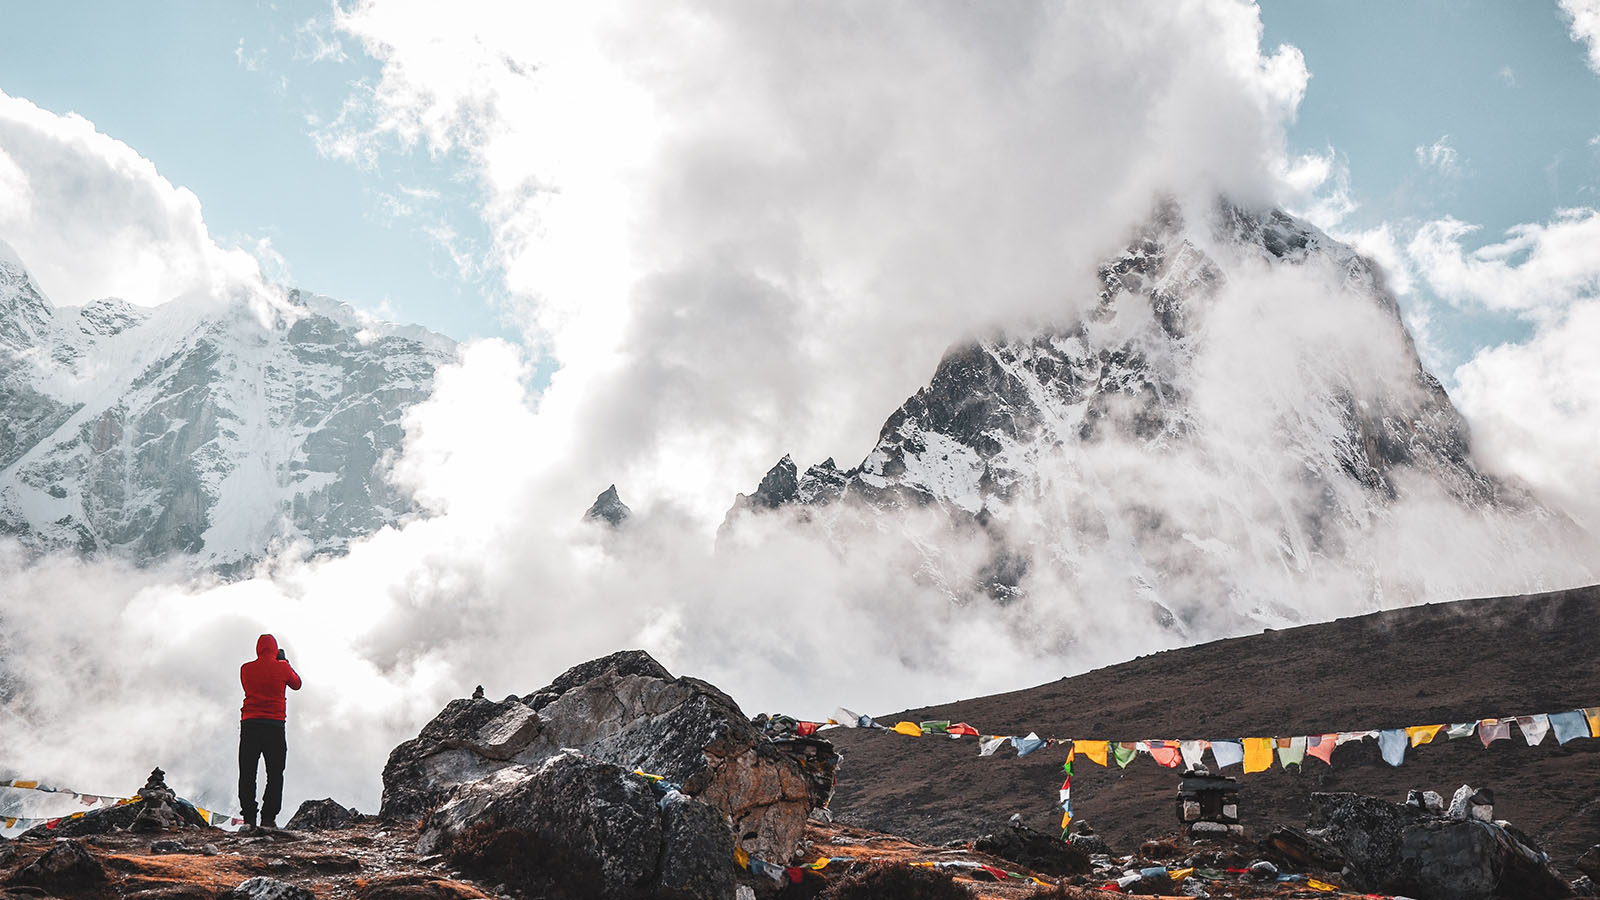 Trekkers from Europe: What Europeans should expect trekking in Nepal